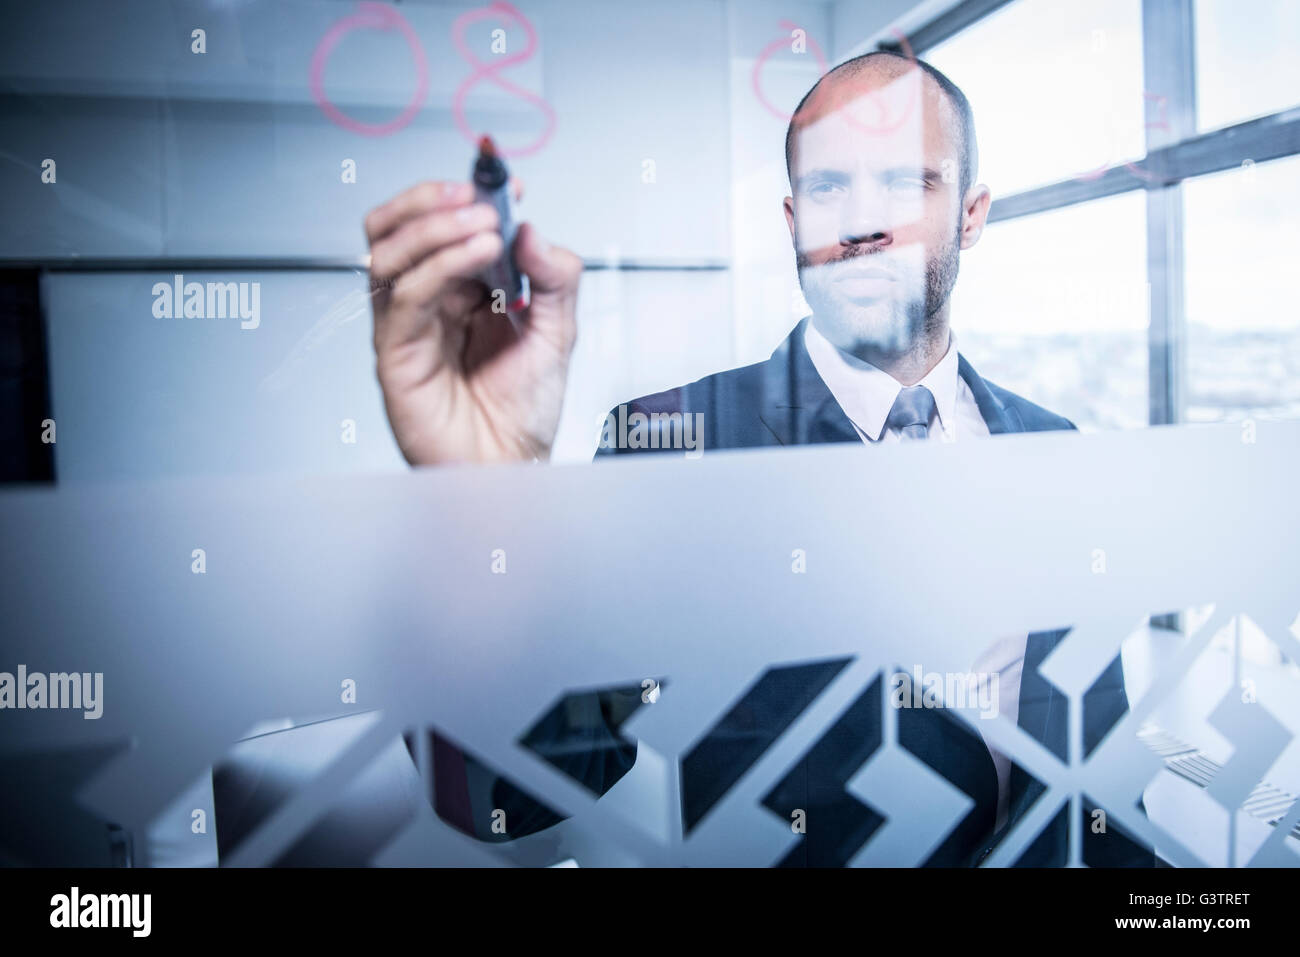 A professional man writing numbers on glass in an office environment. Stock Photo